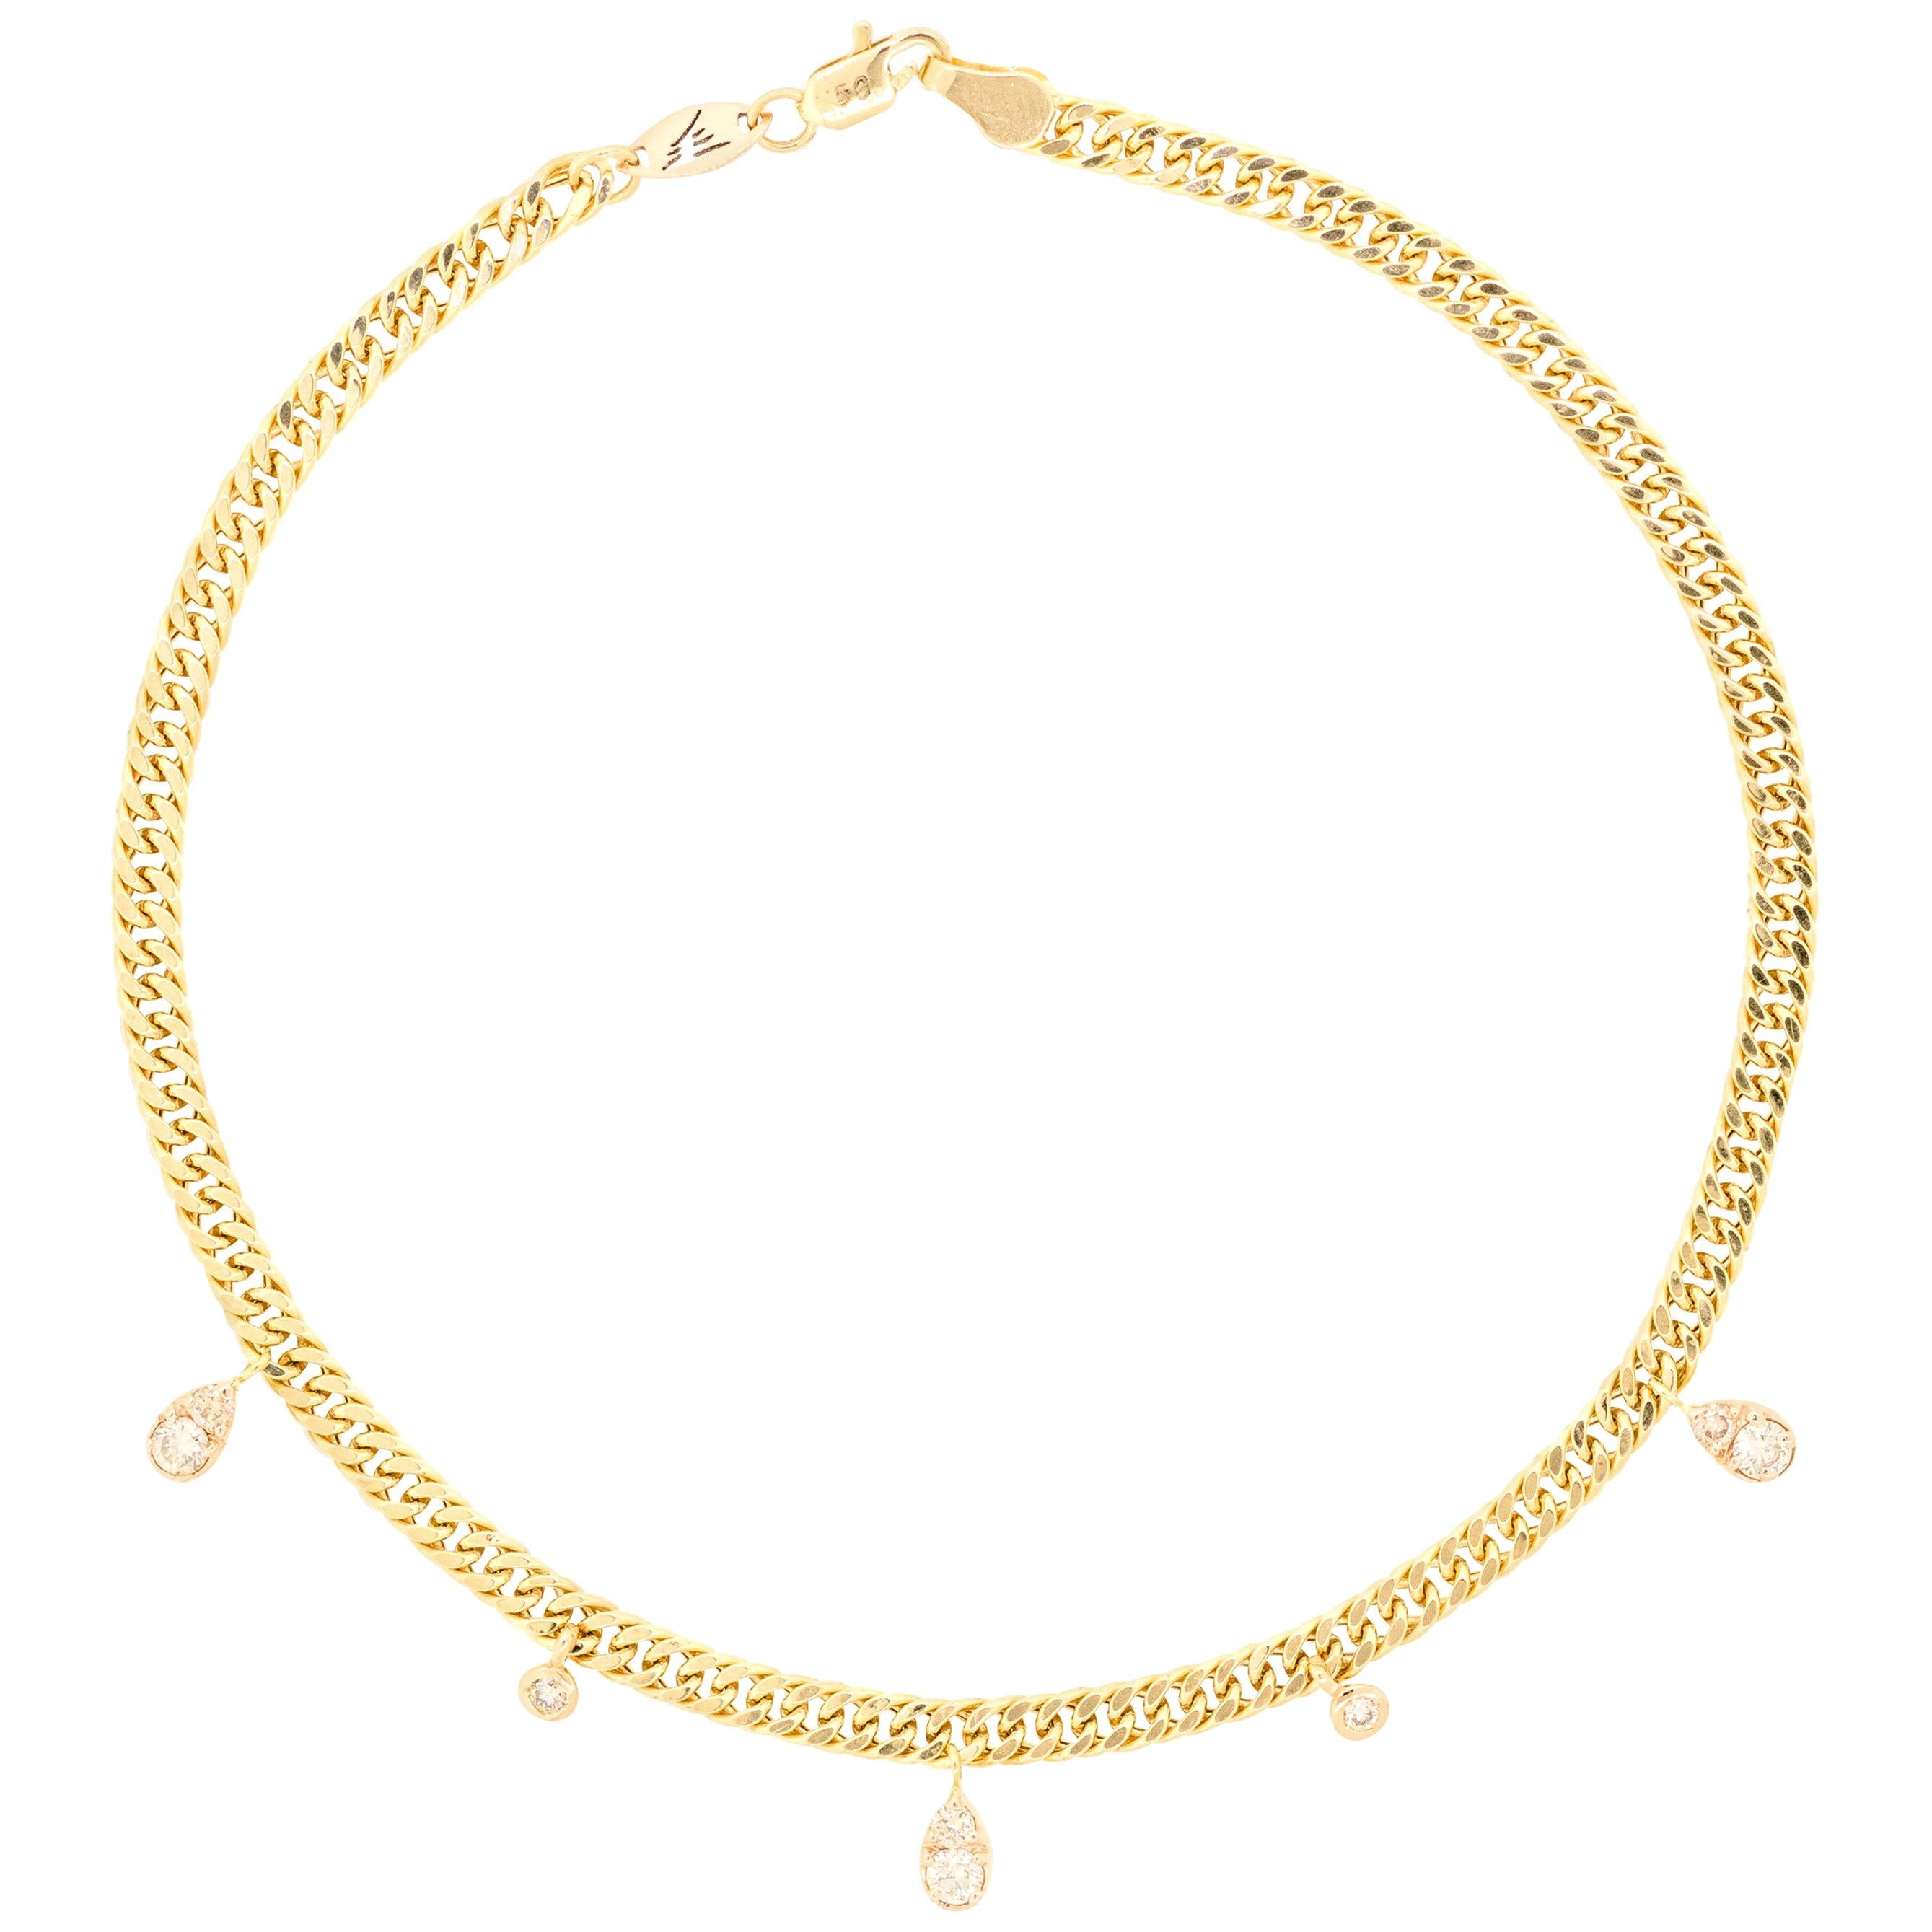 Alessa Rock Star Anklet 18 Karat Yellow Gold Paradise Collection